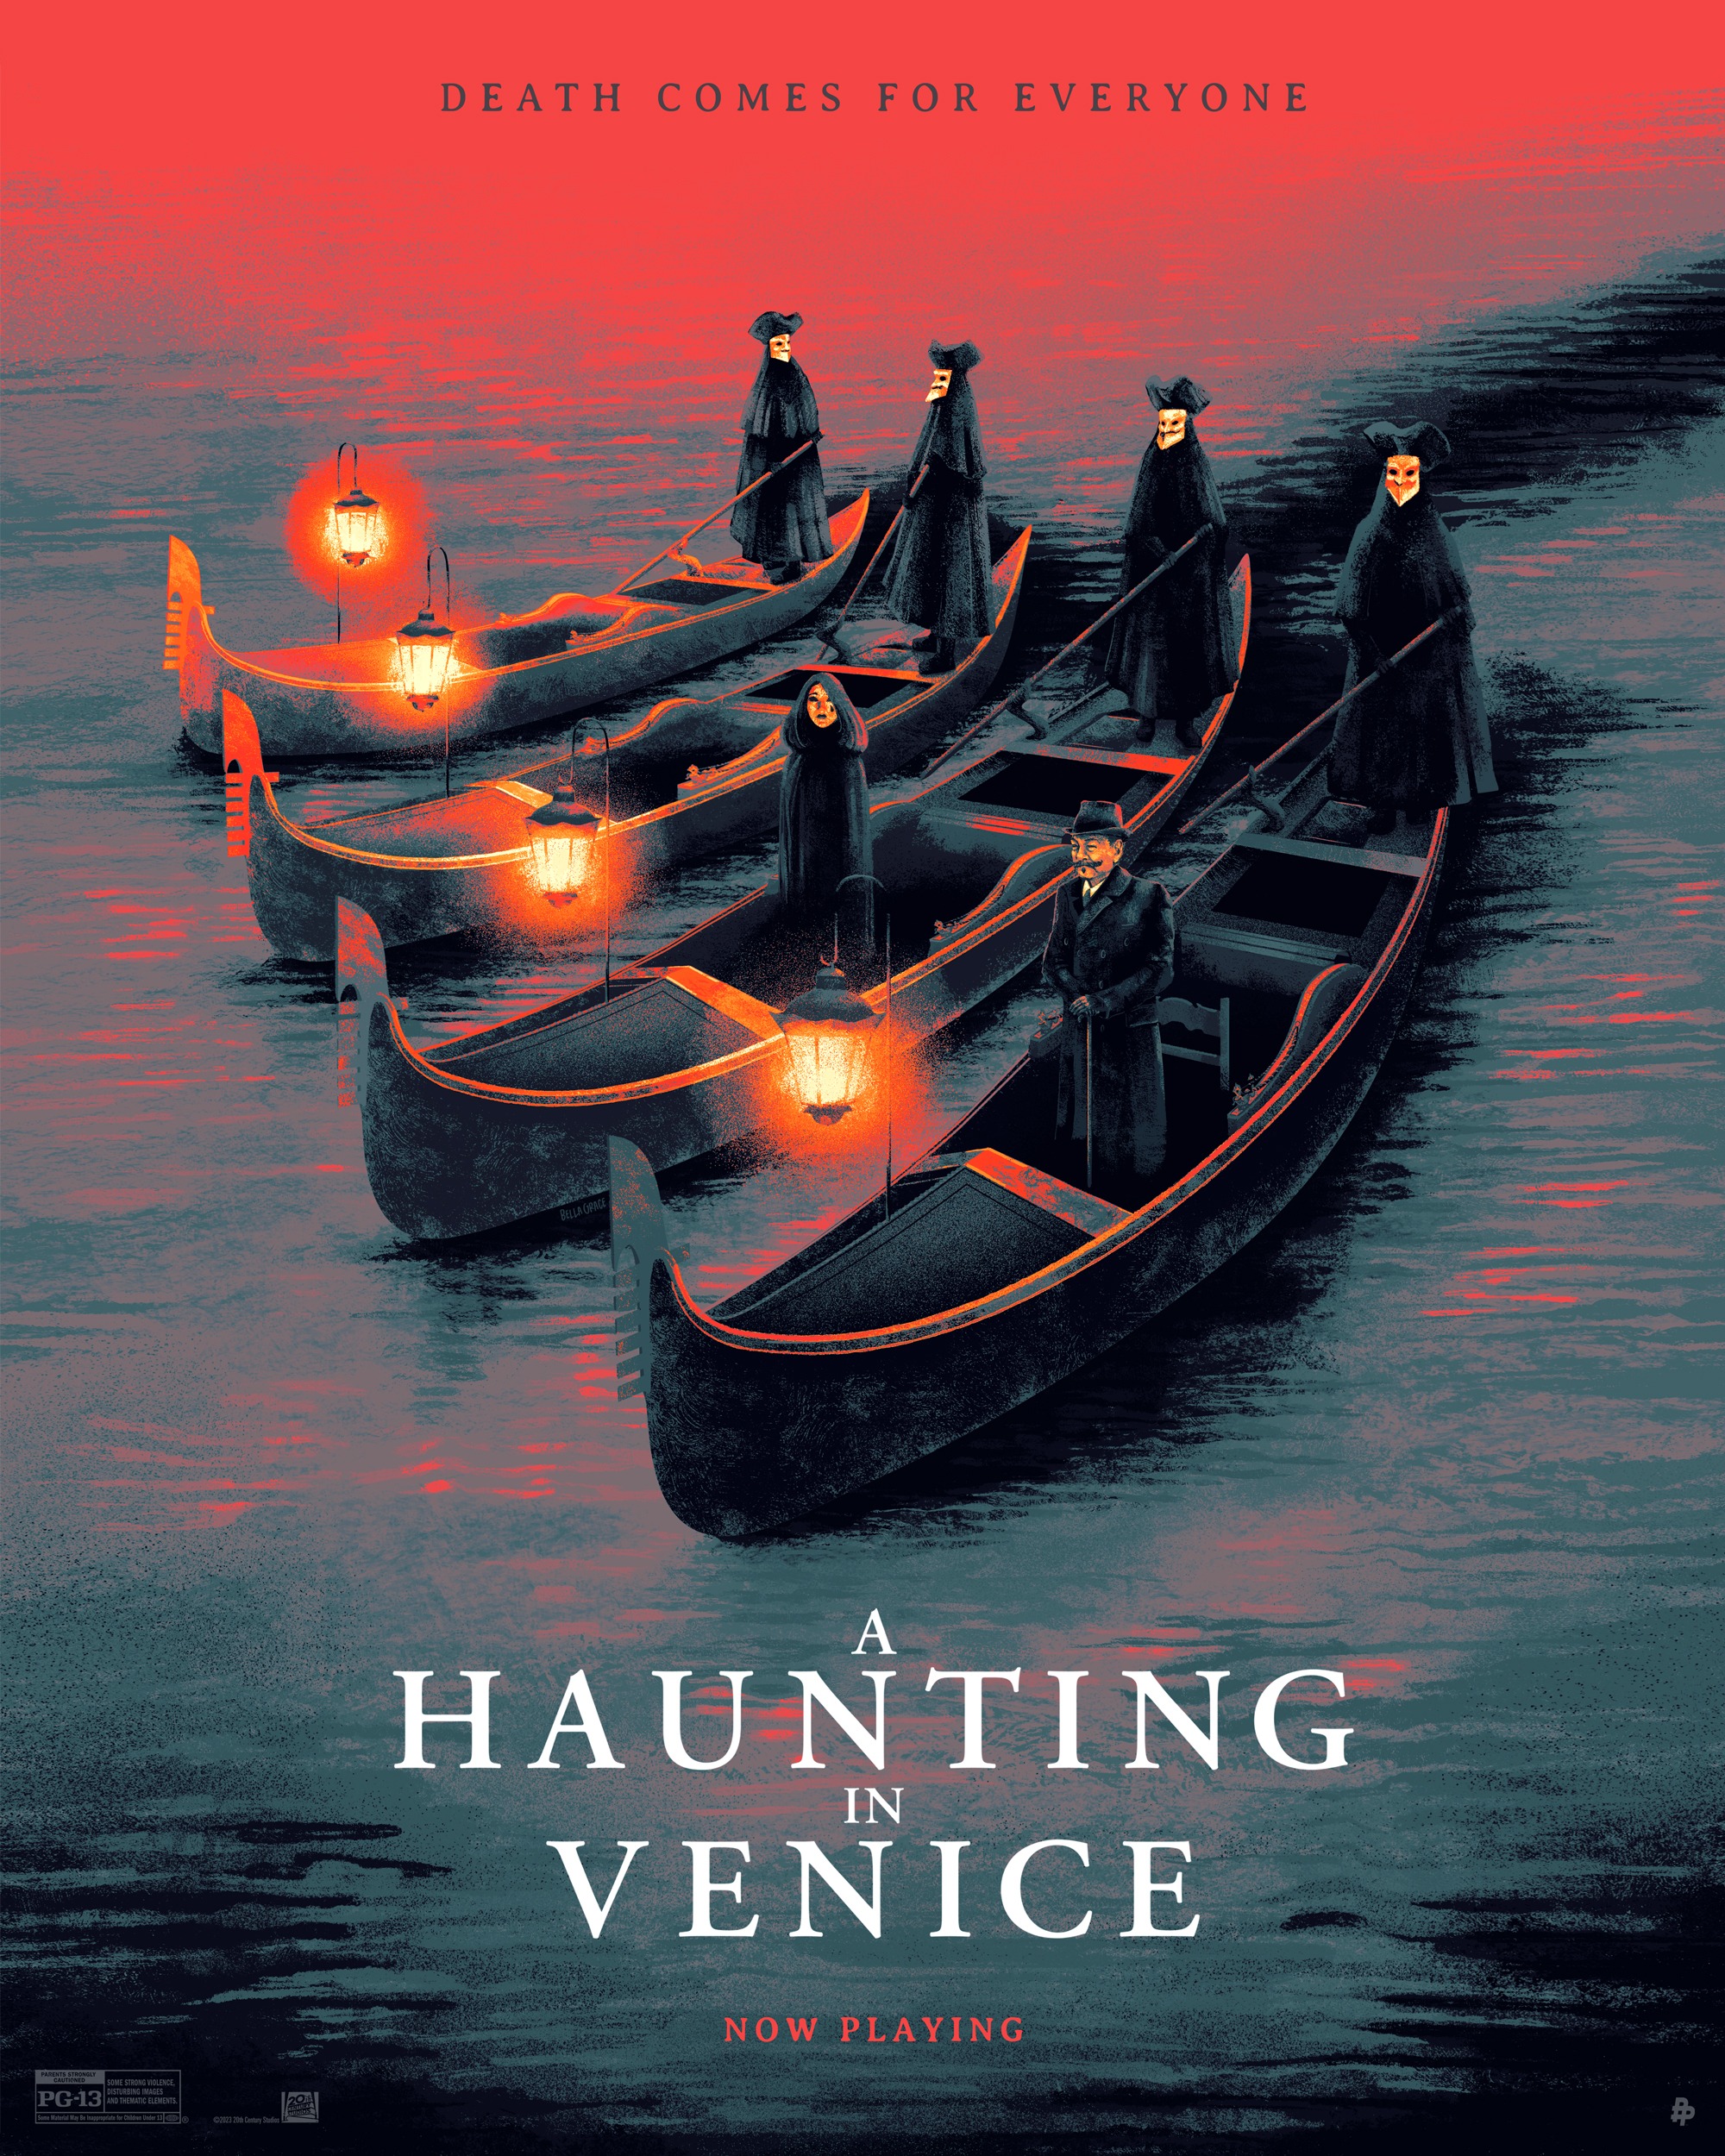 Artwork by 20th Century Studio – A Haunting In Venice